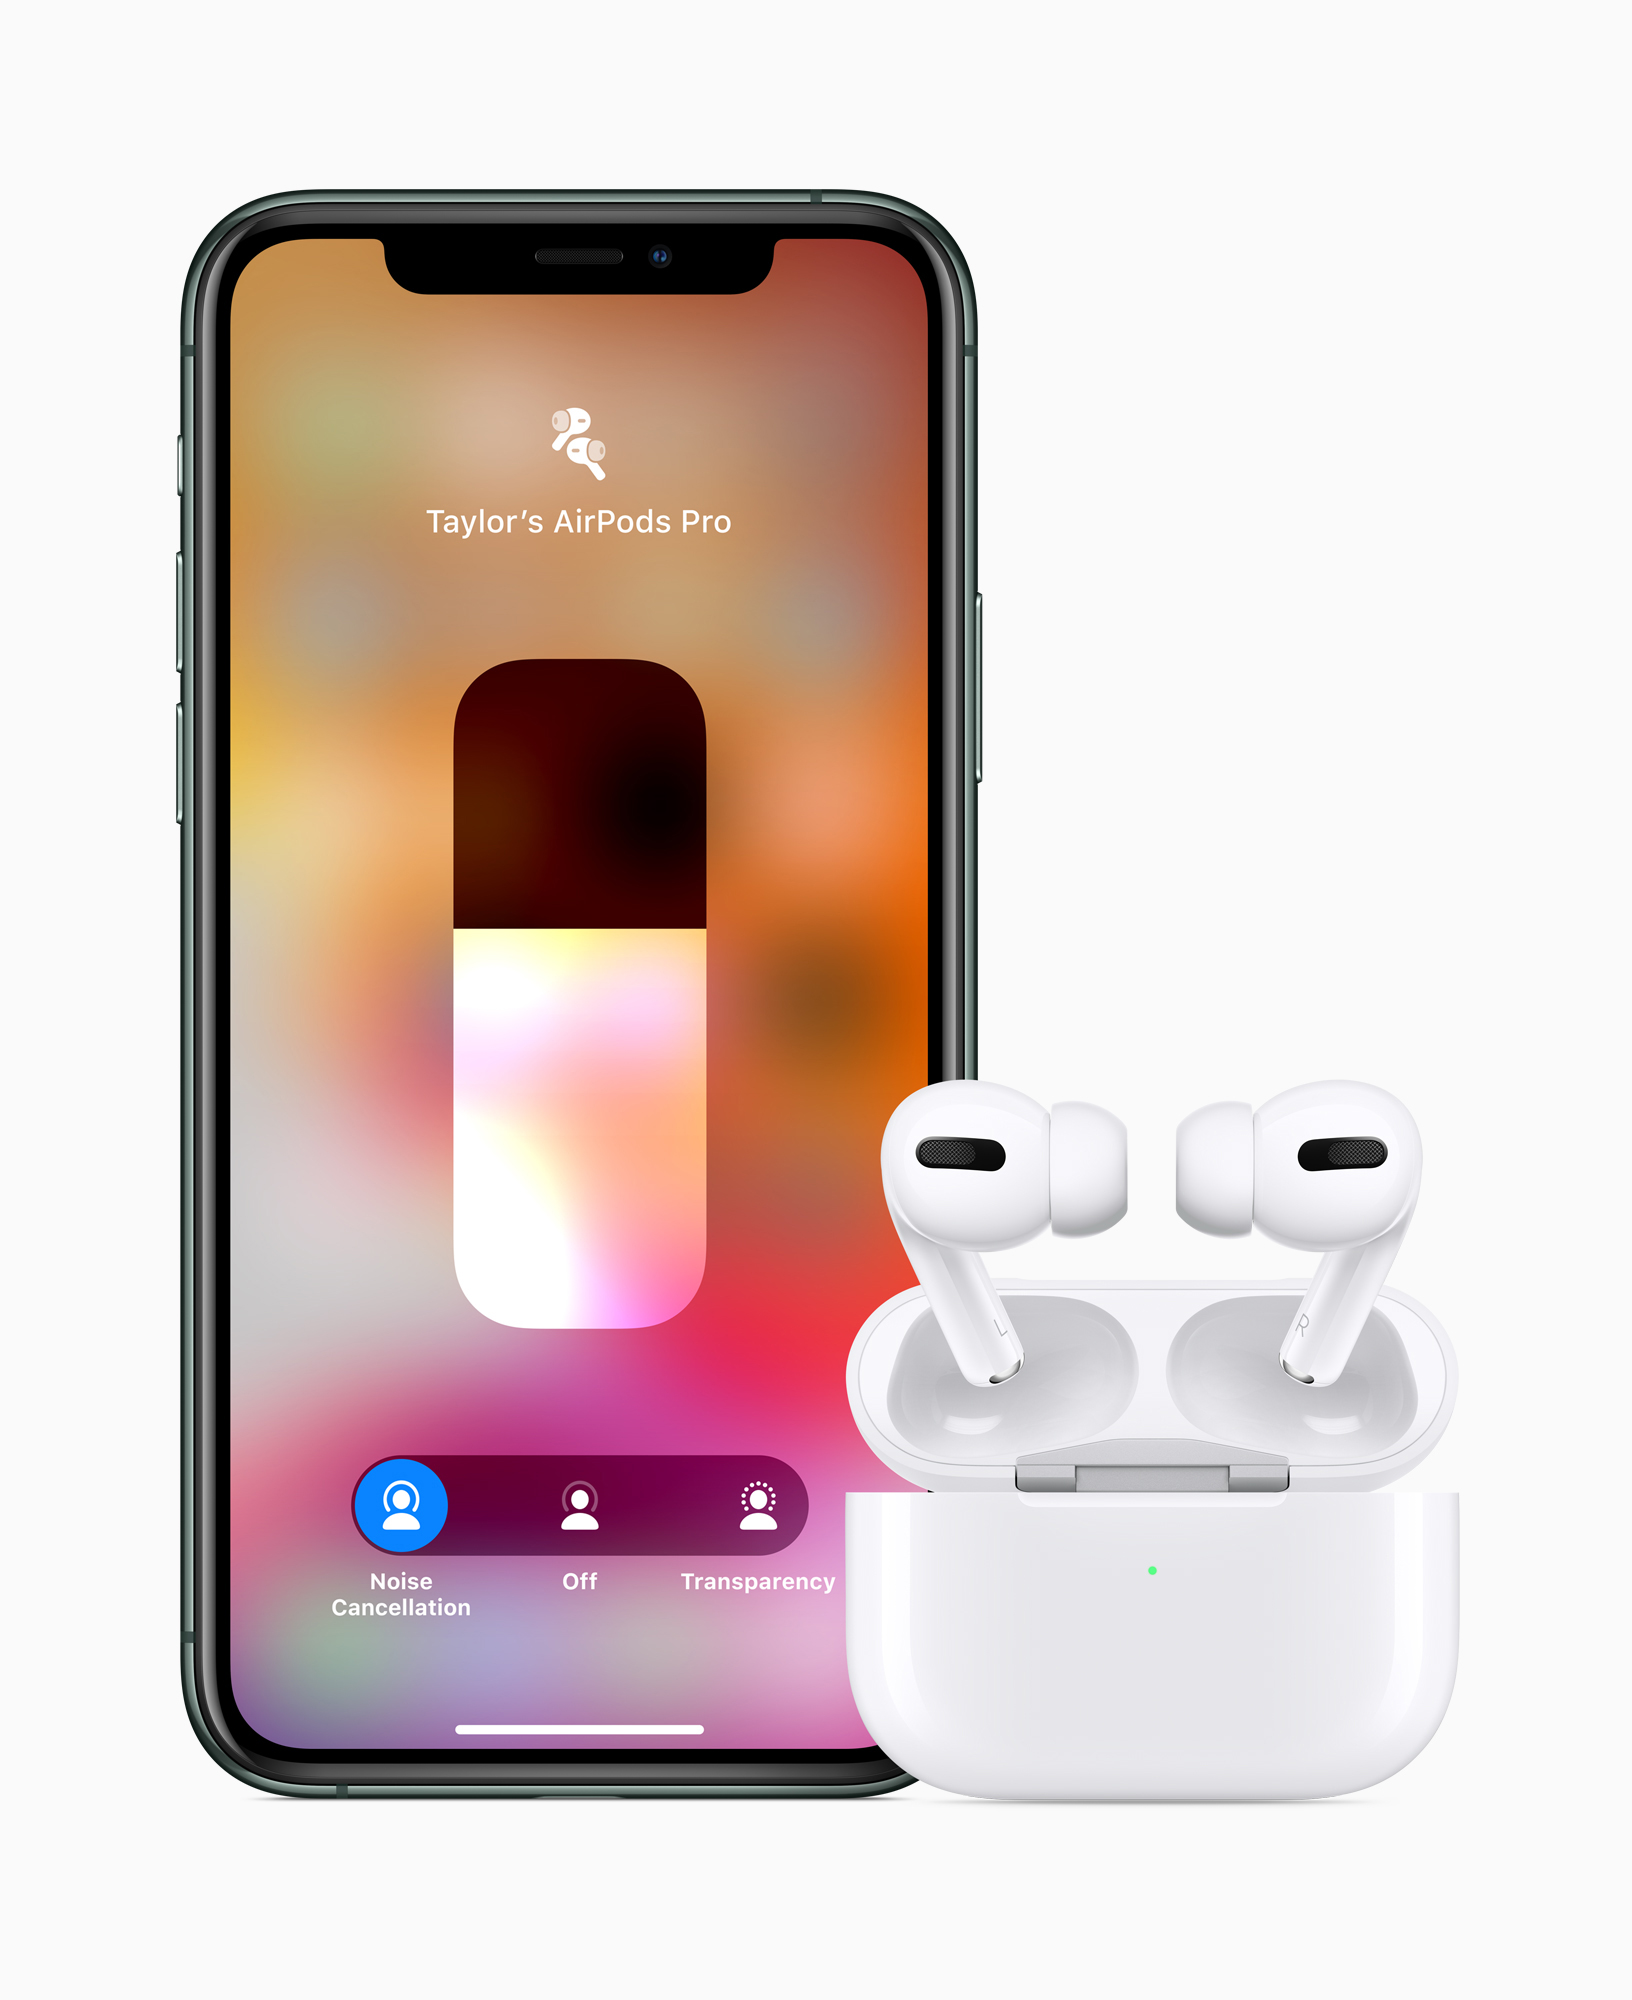 2021 iPhone SE, New AirPods Pro Could Arrive in April